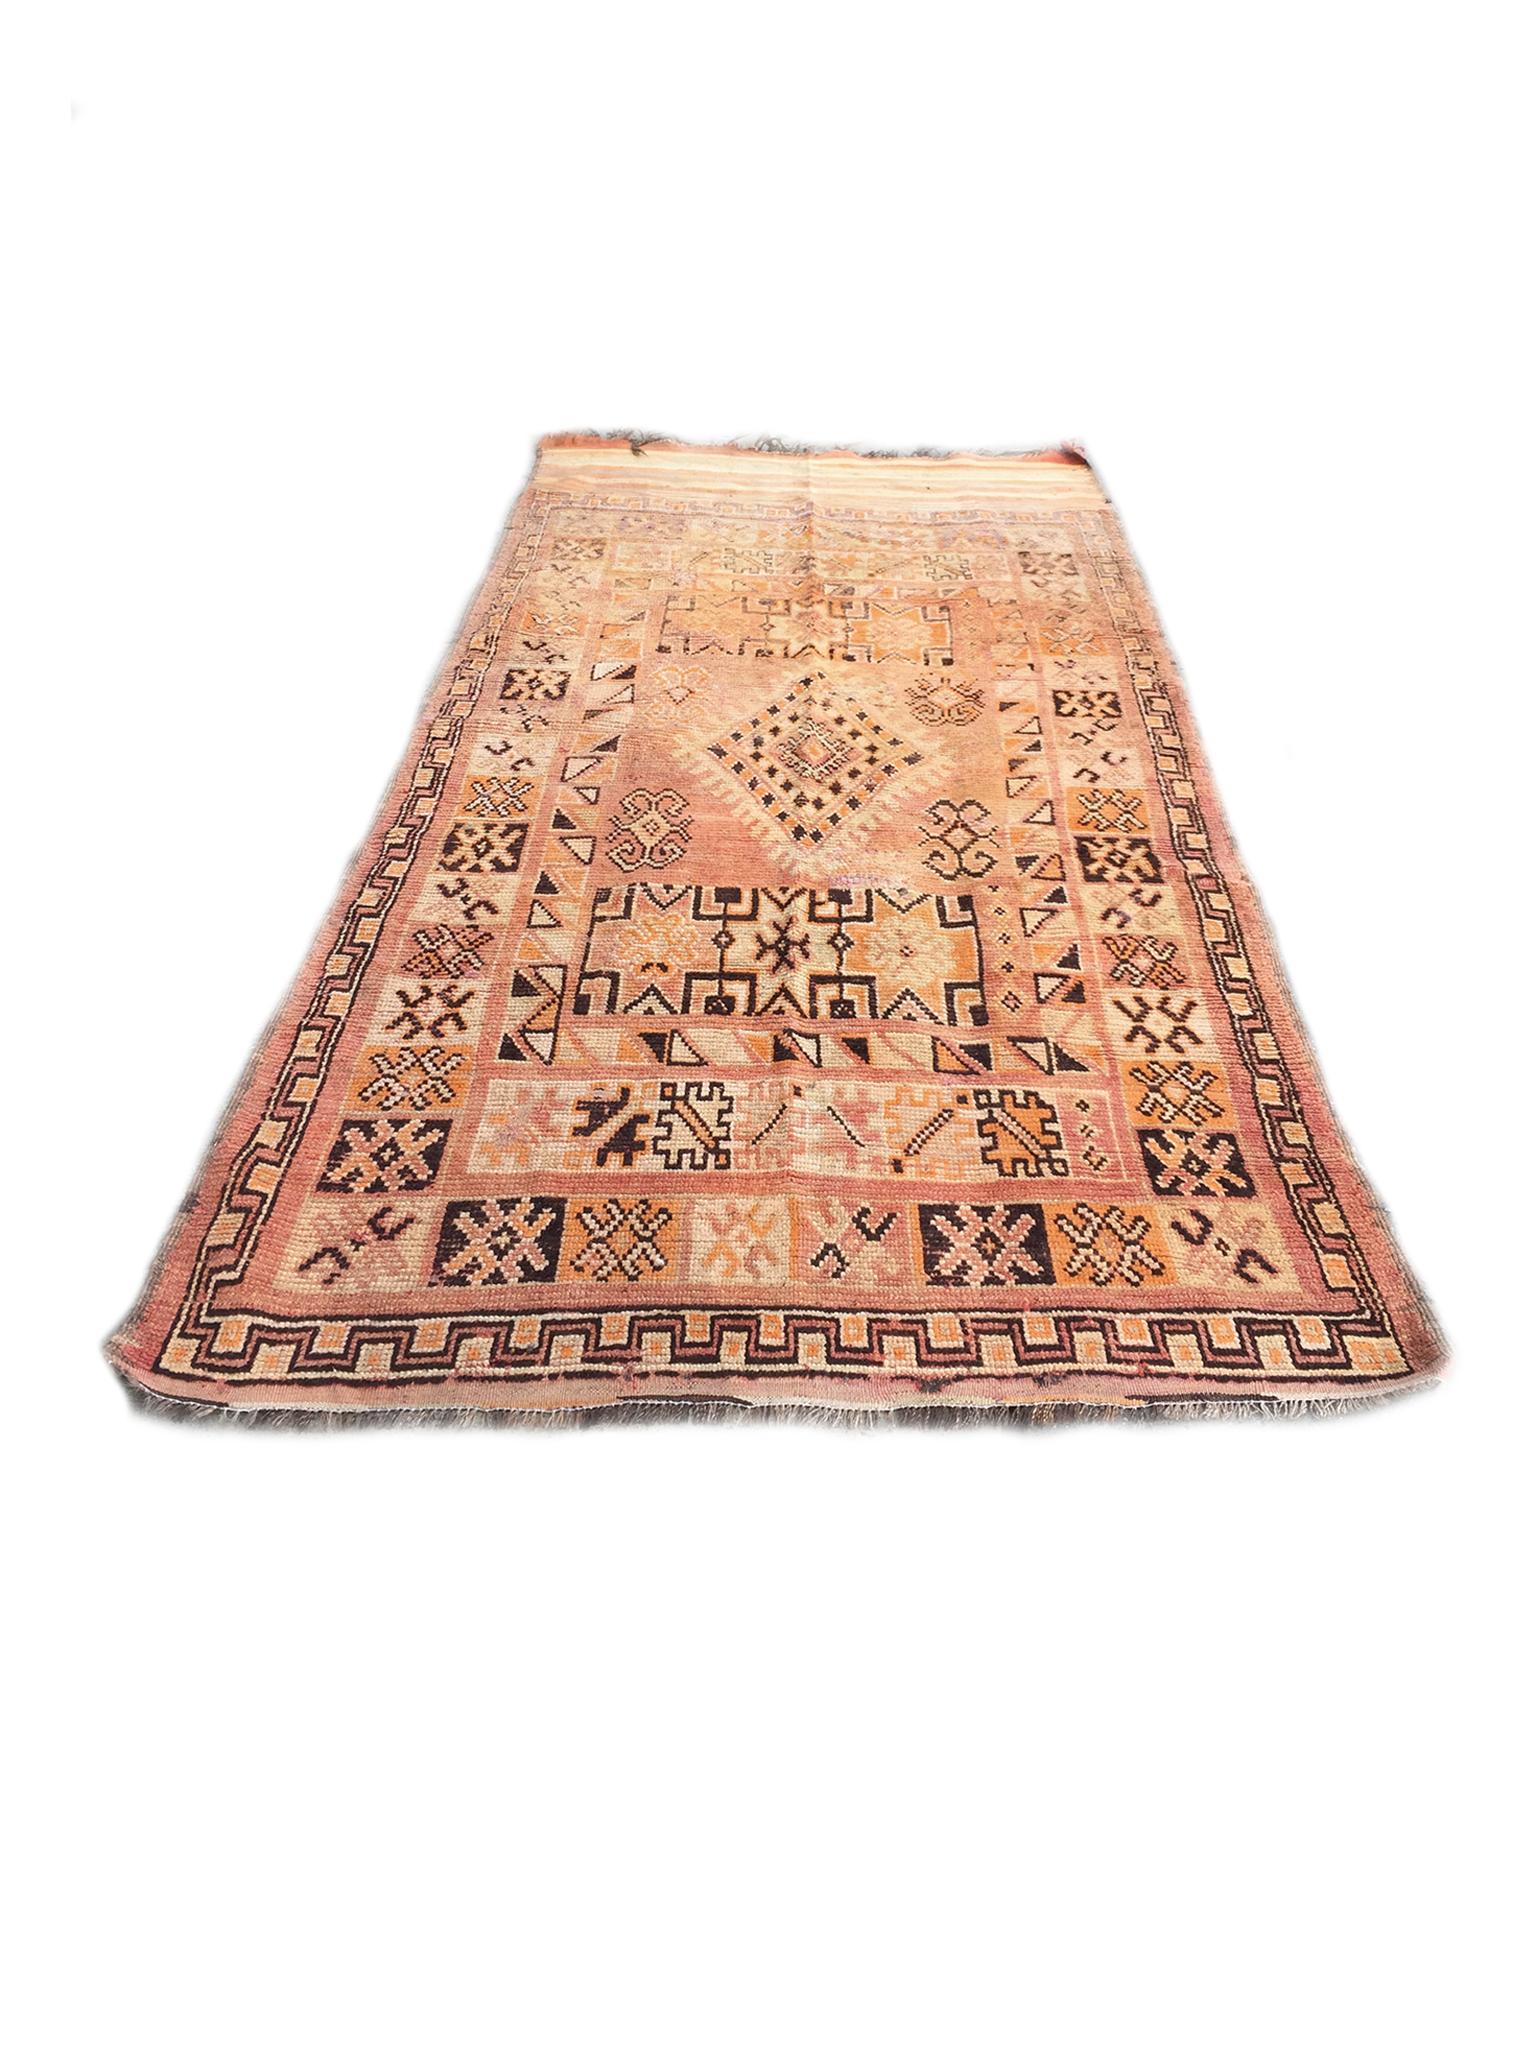 Dyed 1940s Moroccan Runner Rug